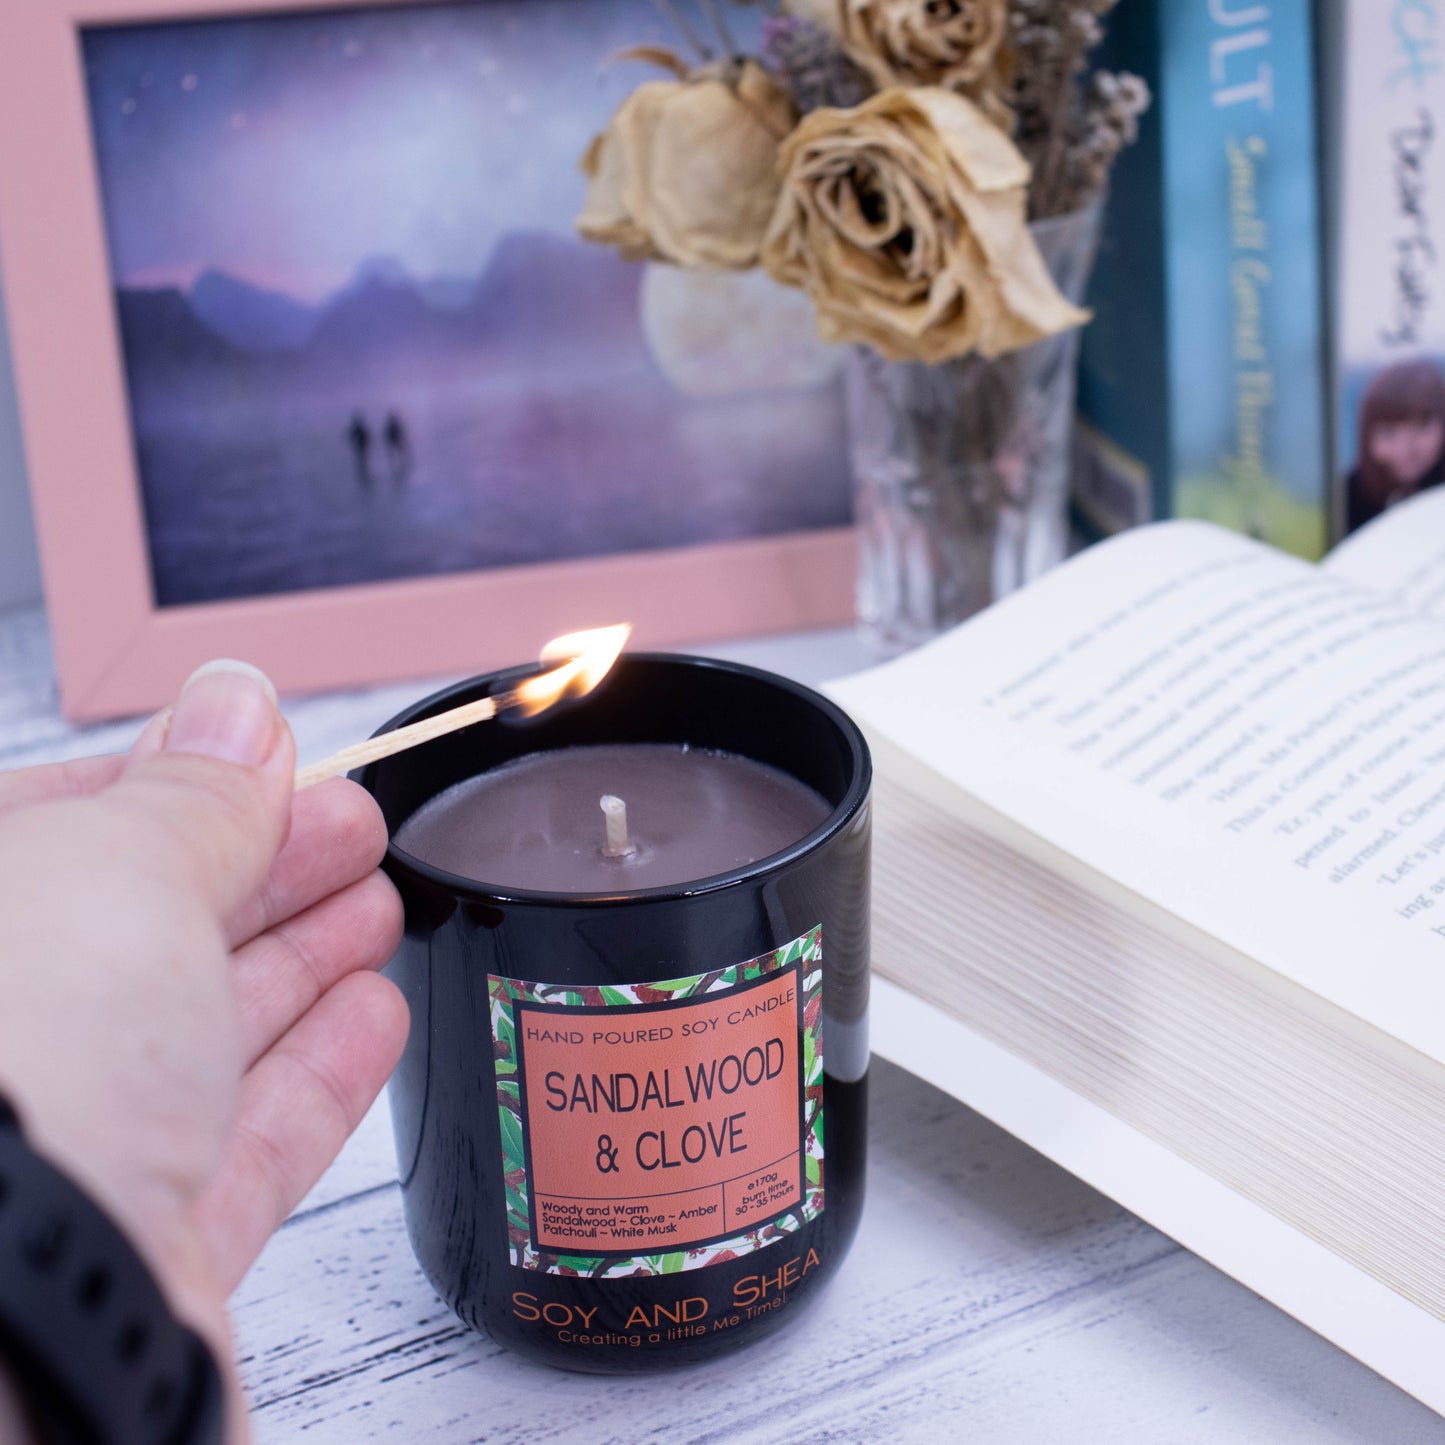 A black glass candle filled with brown wax is about to be lit with a match. There is an open book to the side of the candle with other books in the background along with a vase of dried flowers and a picture in a pale pink frame